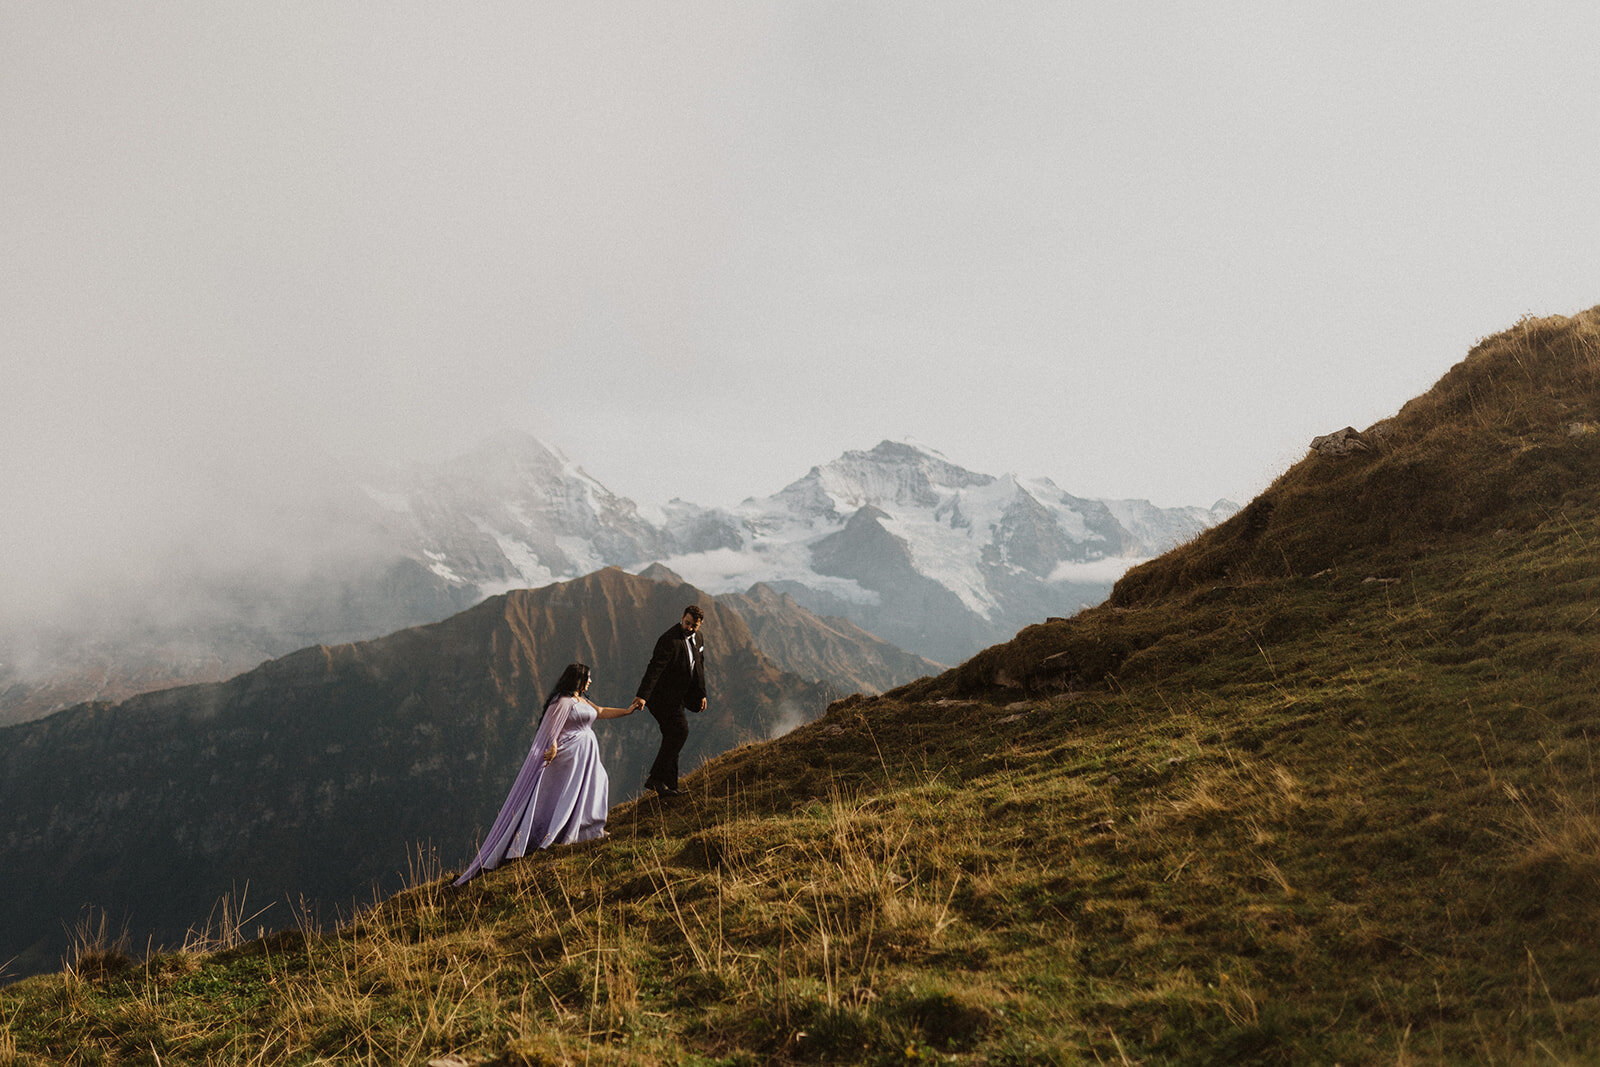 The wedding couple has a photo shoot at the Schynige Platte in the Swiss mountains. Bride wears a purple dress.